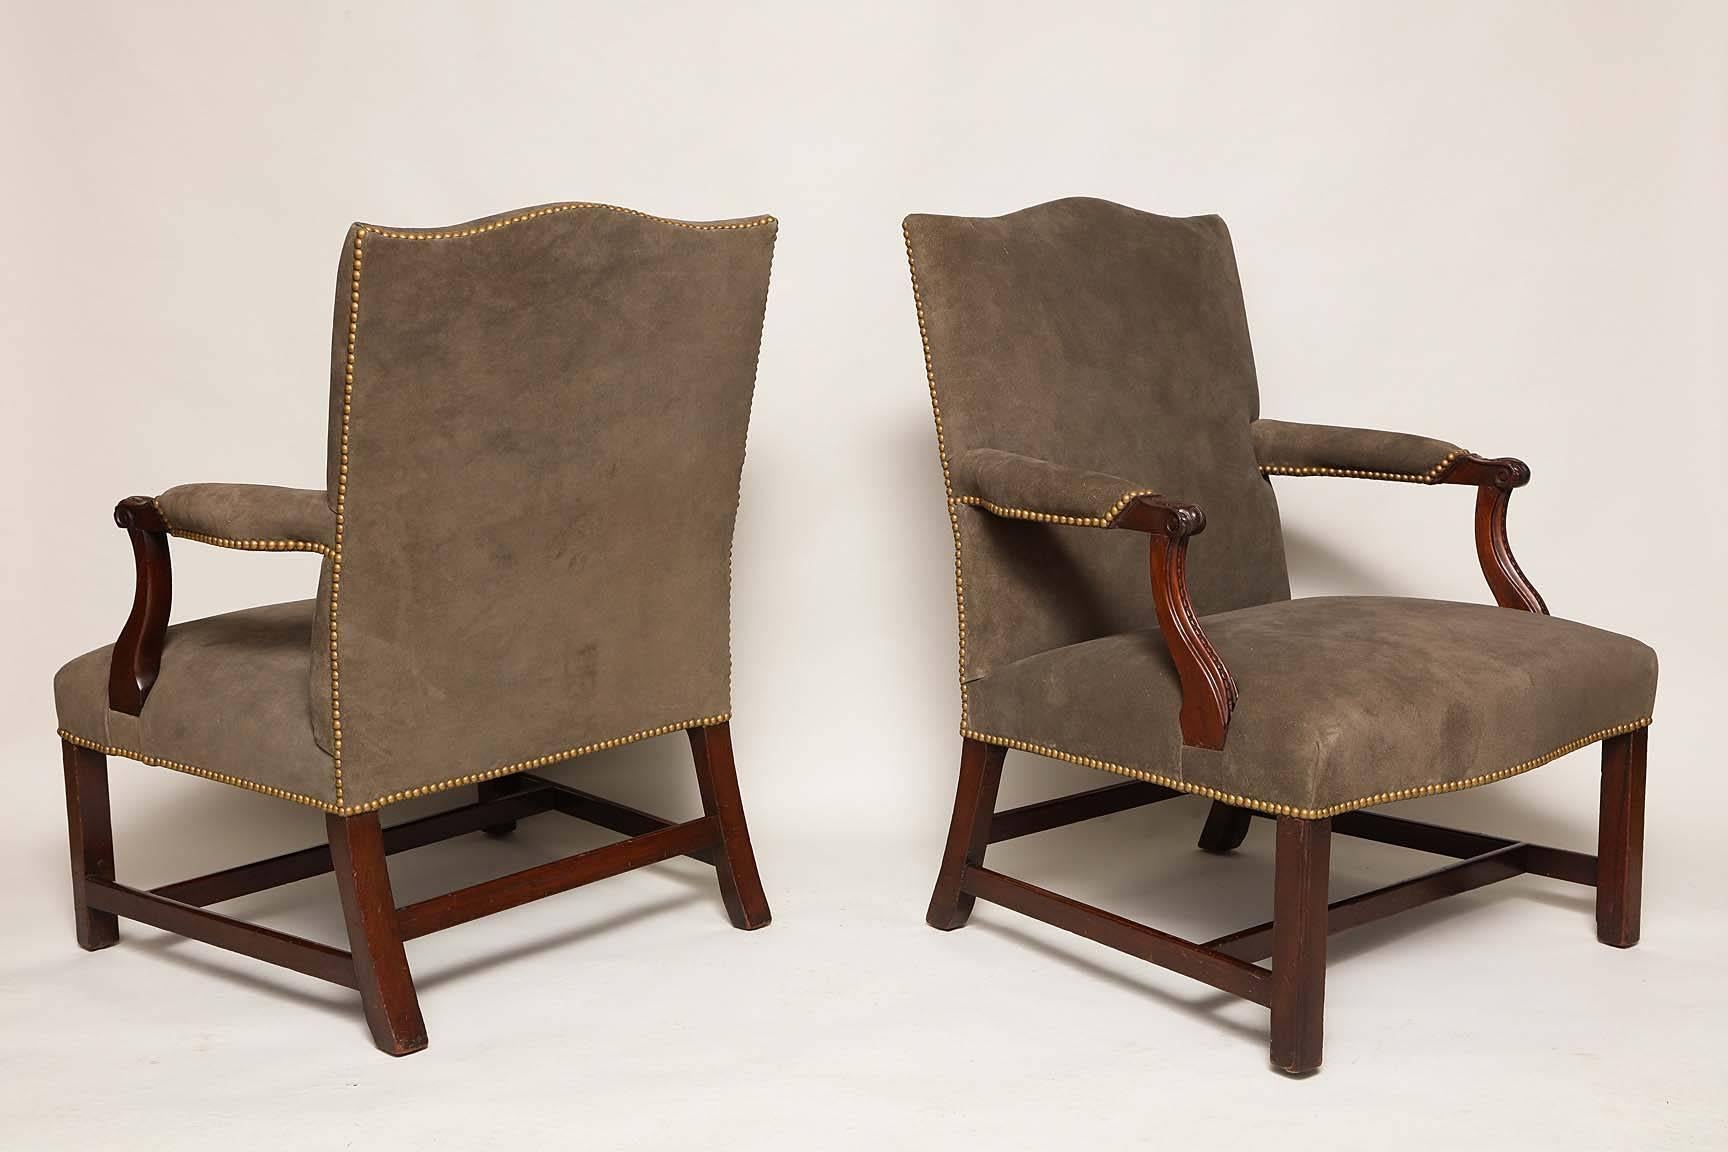 Good pair of Georgian style mahogany and suede Gainsborough chairs, the shaped back with gentle rake over upholstered arms with acanthus and bead carving, standing on square legs joined by flat stretchers, having good color and proportions and being